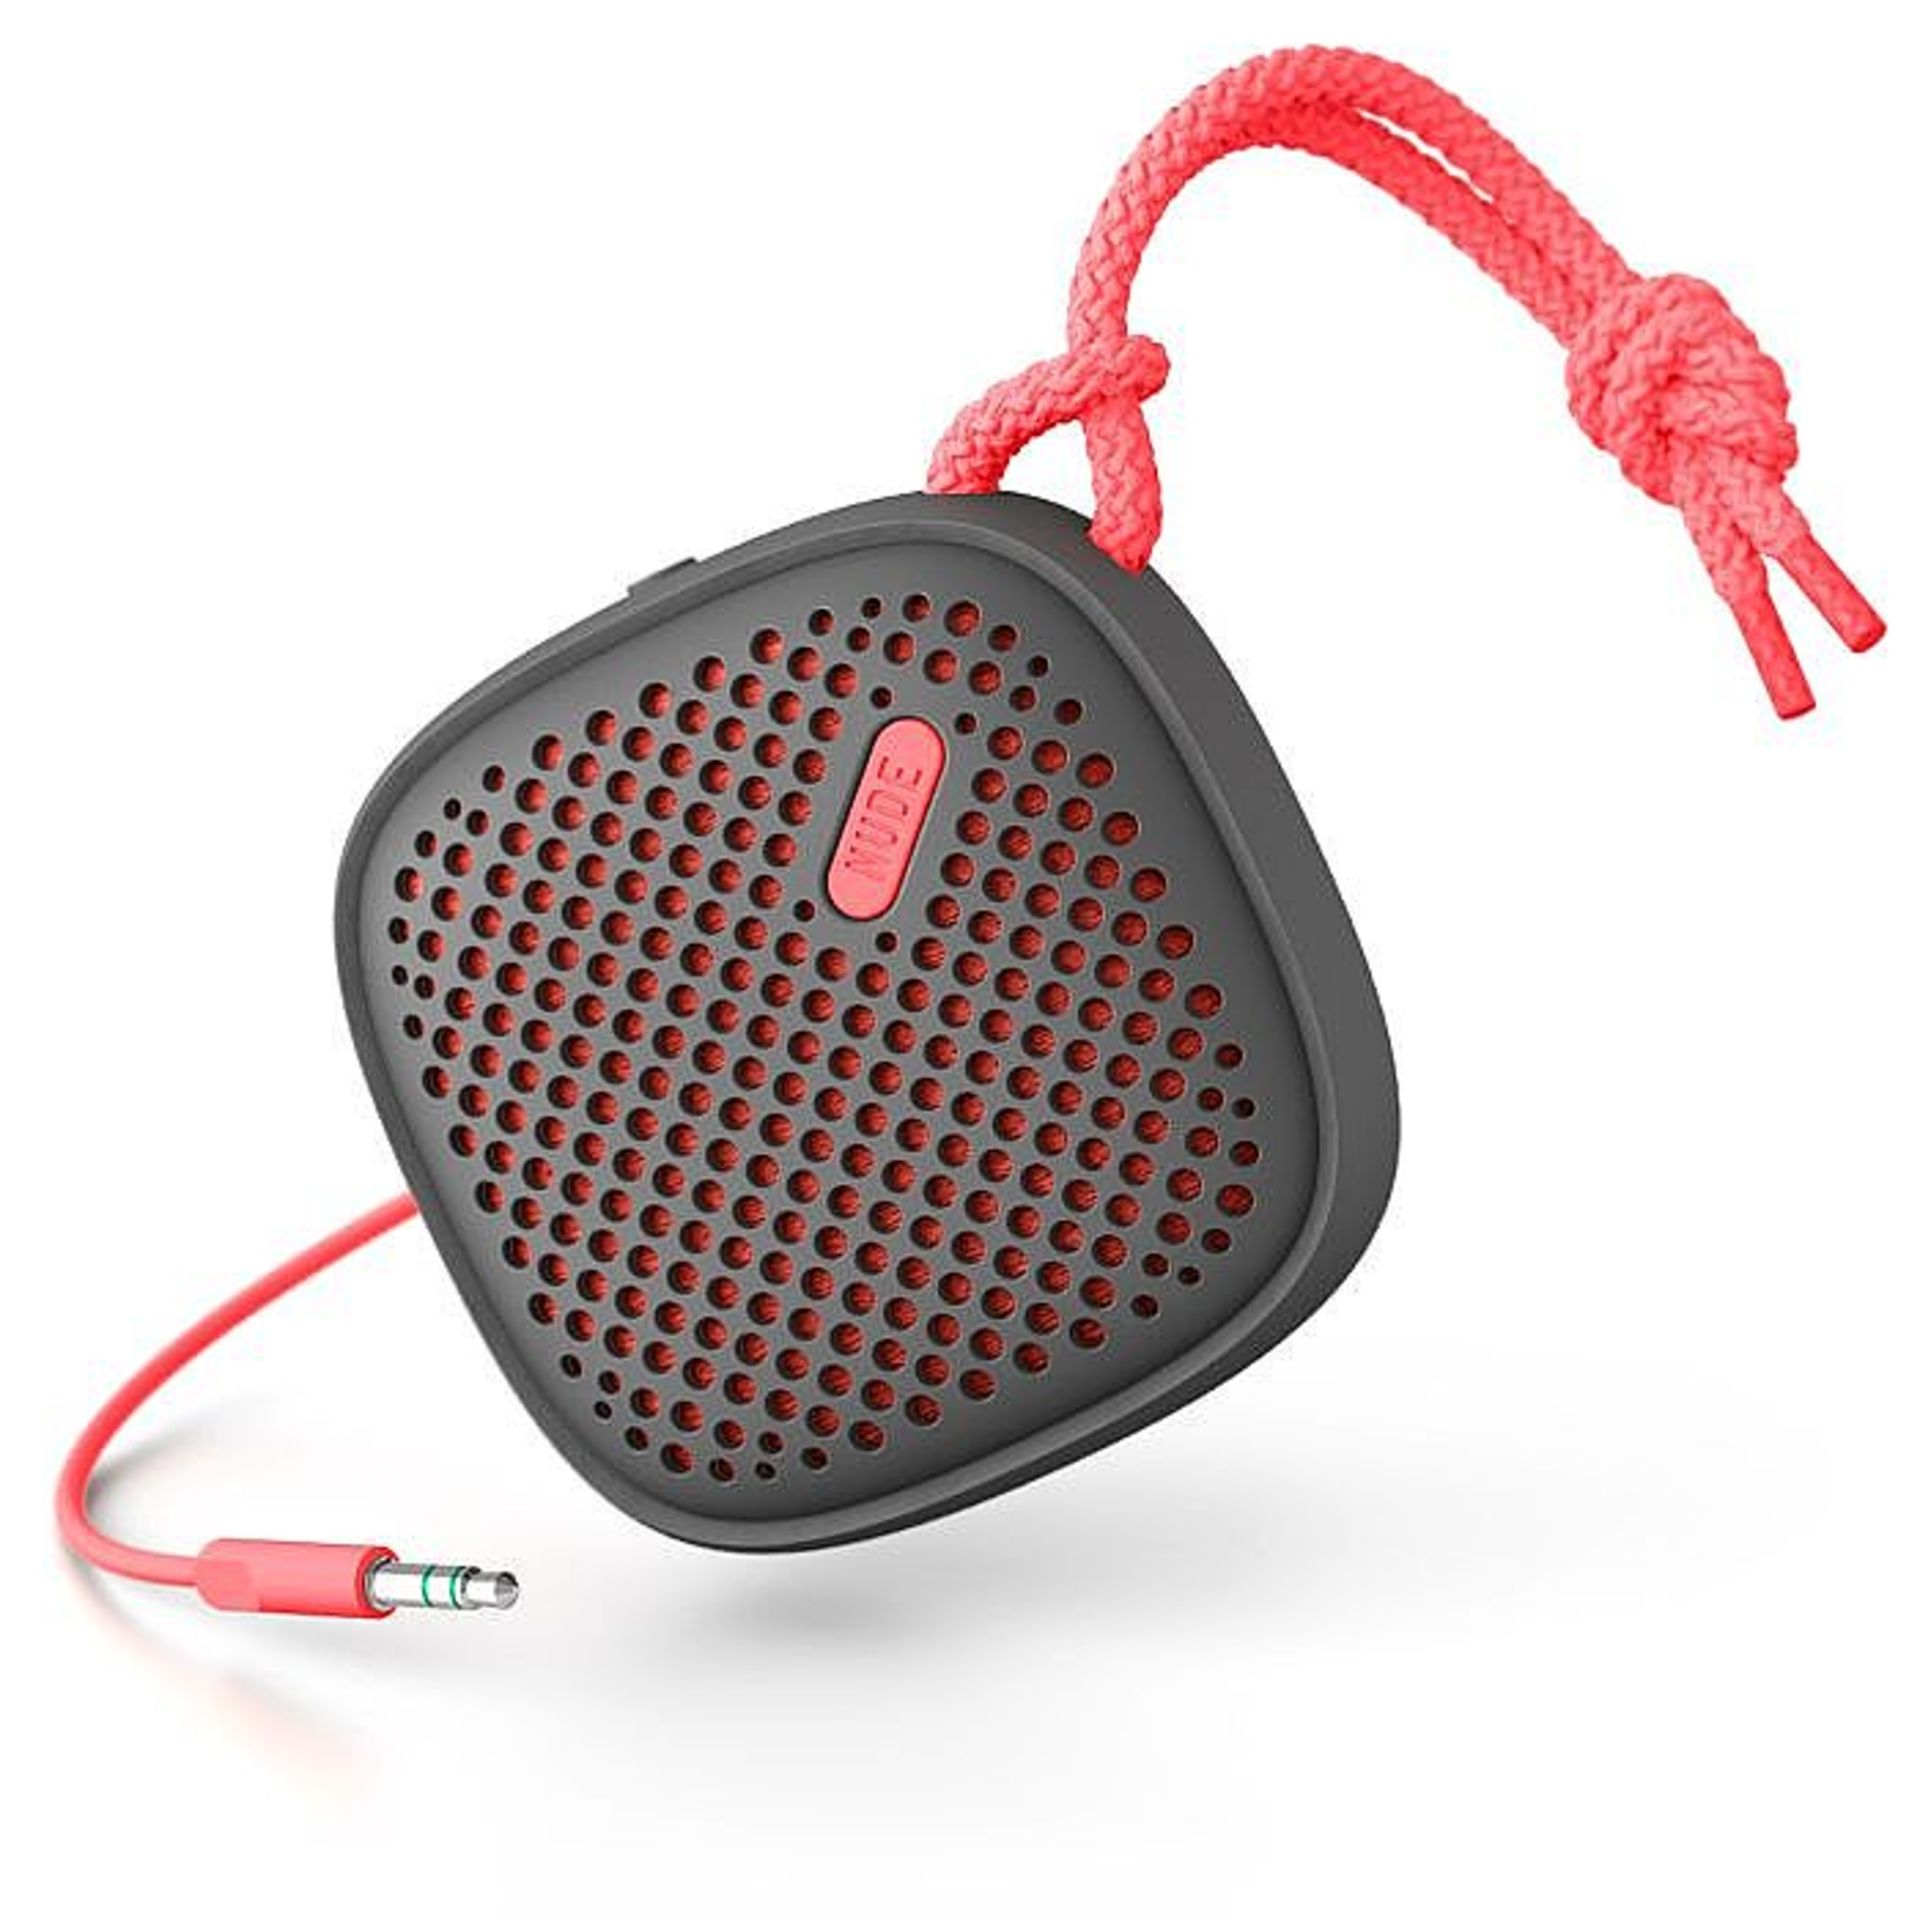 V *TRADE QTY* Brand New Nude Audio Move S Wired Portable Speaker - Coral X 10 YOUR BID PRICE TO BE